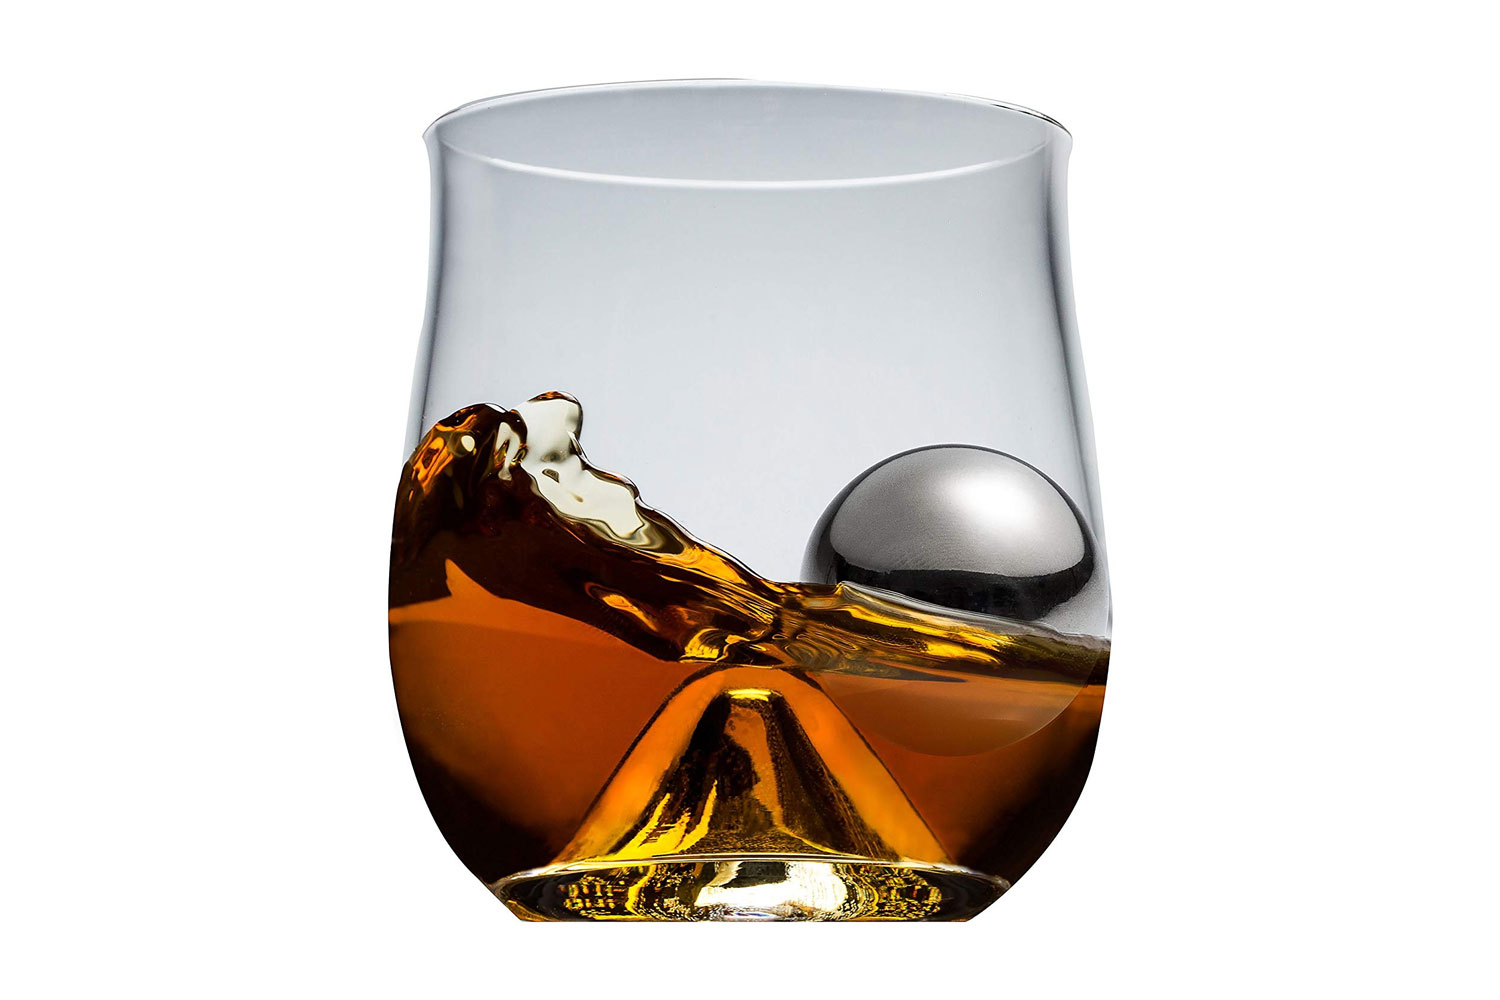 Norlan Whisky Glass // Set of 2 - Norlan Glass PERMANENT STORE - Touch of  Modern